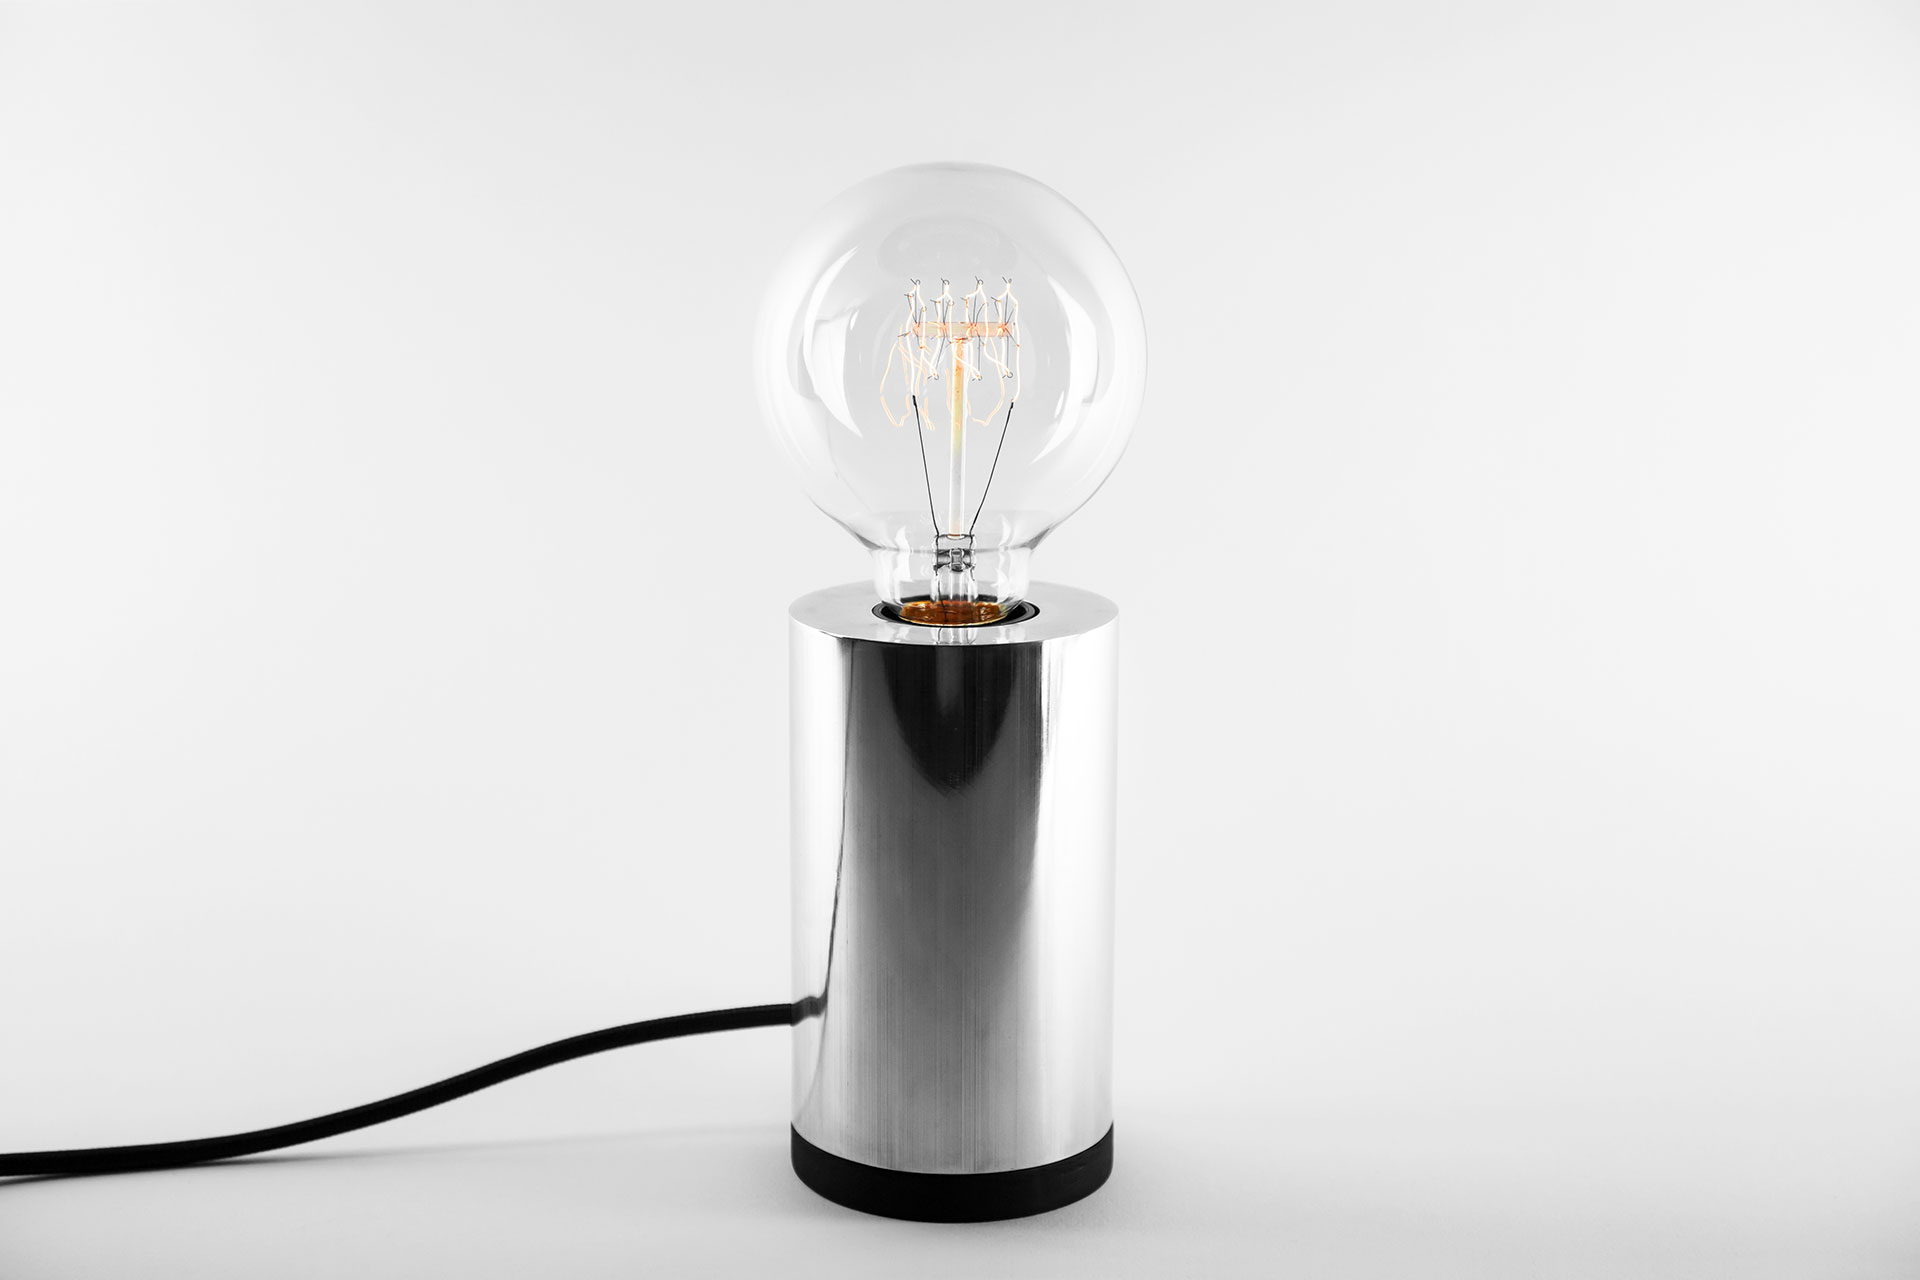 Aluminum table lamp with retro Tesla bulb inspired by masculine minimalist design